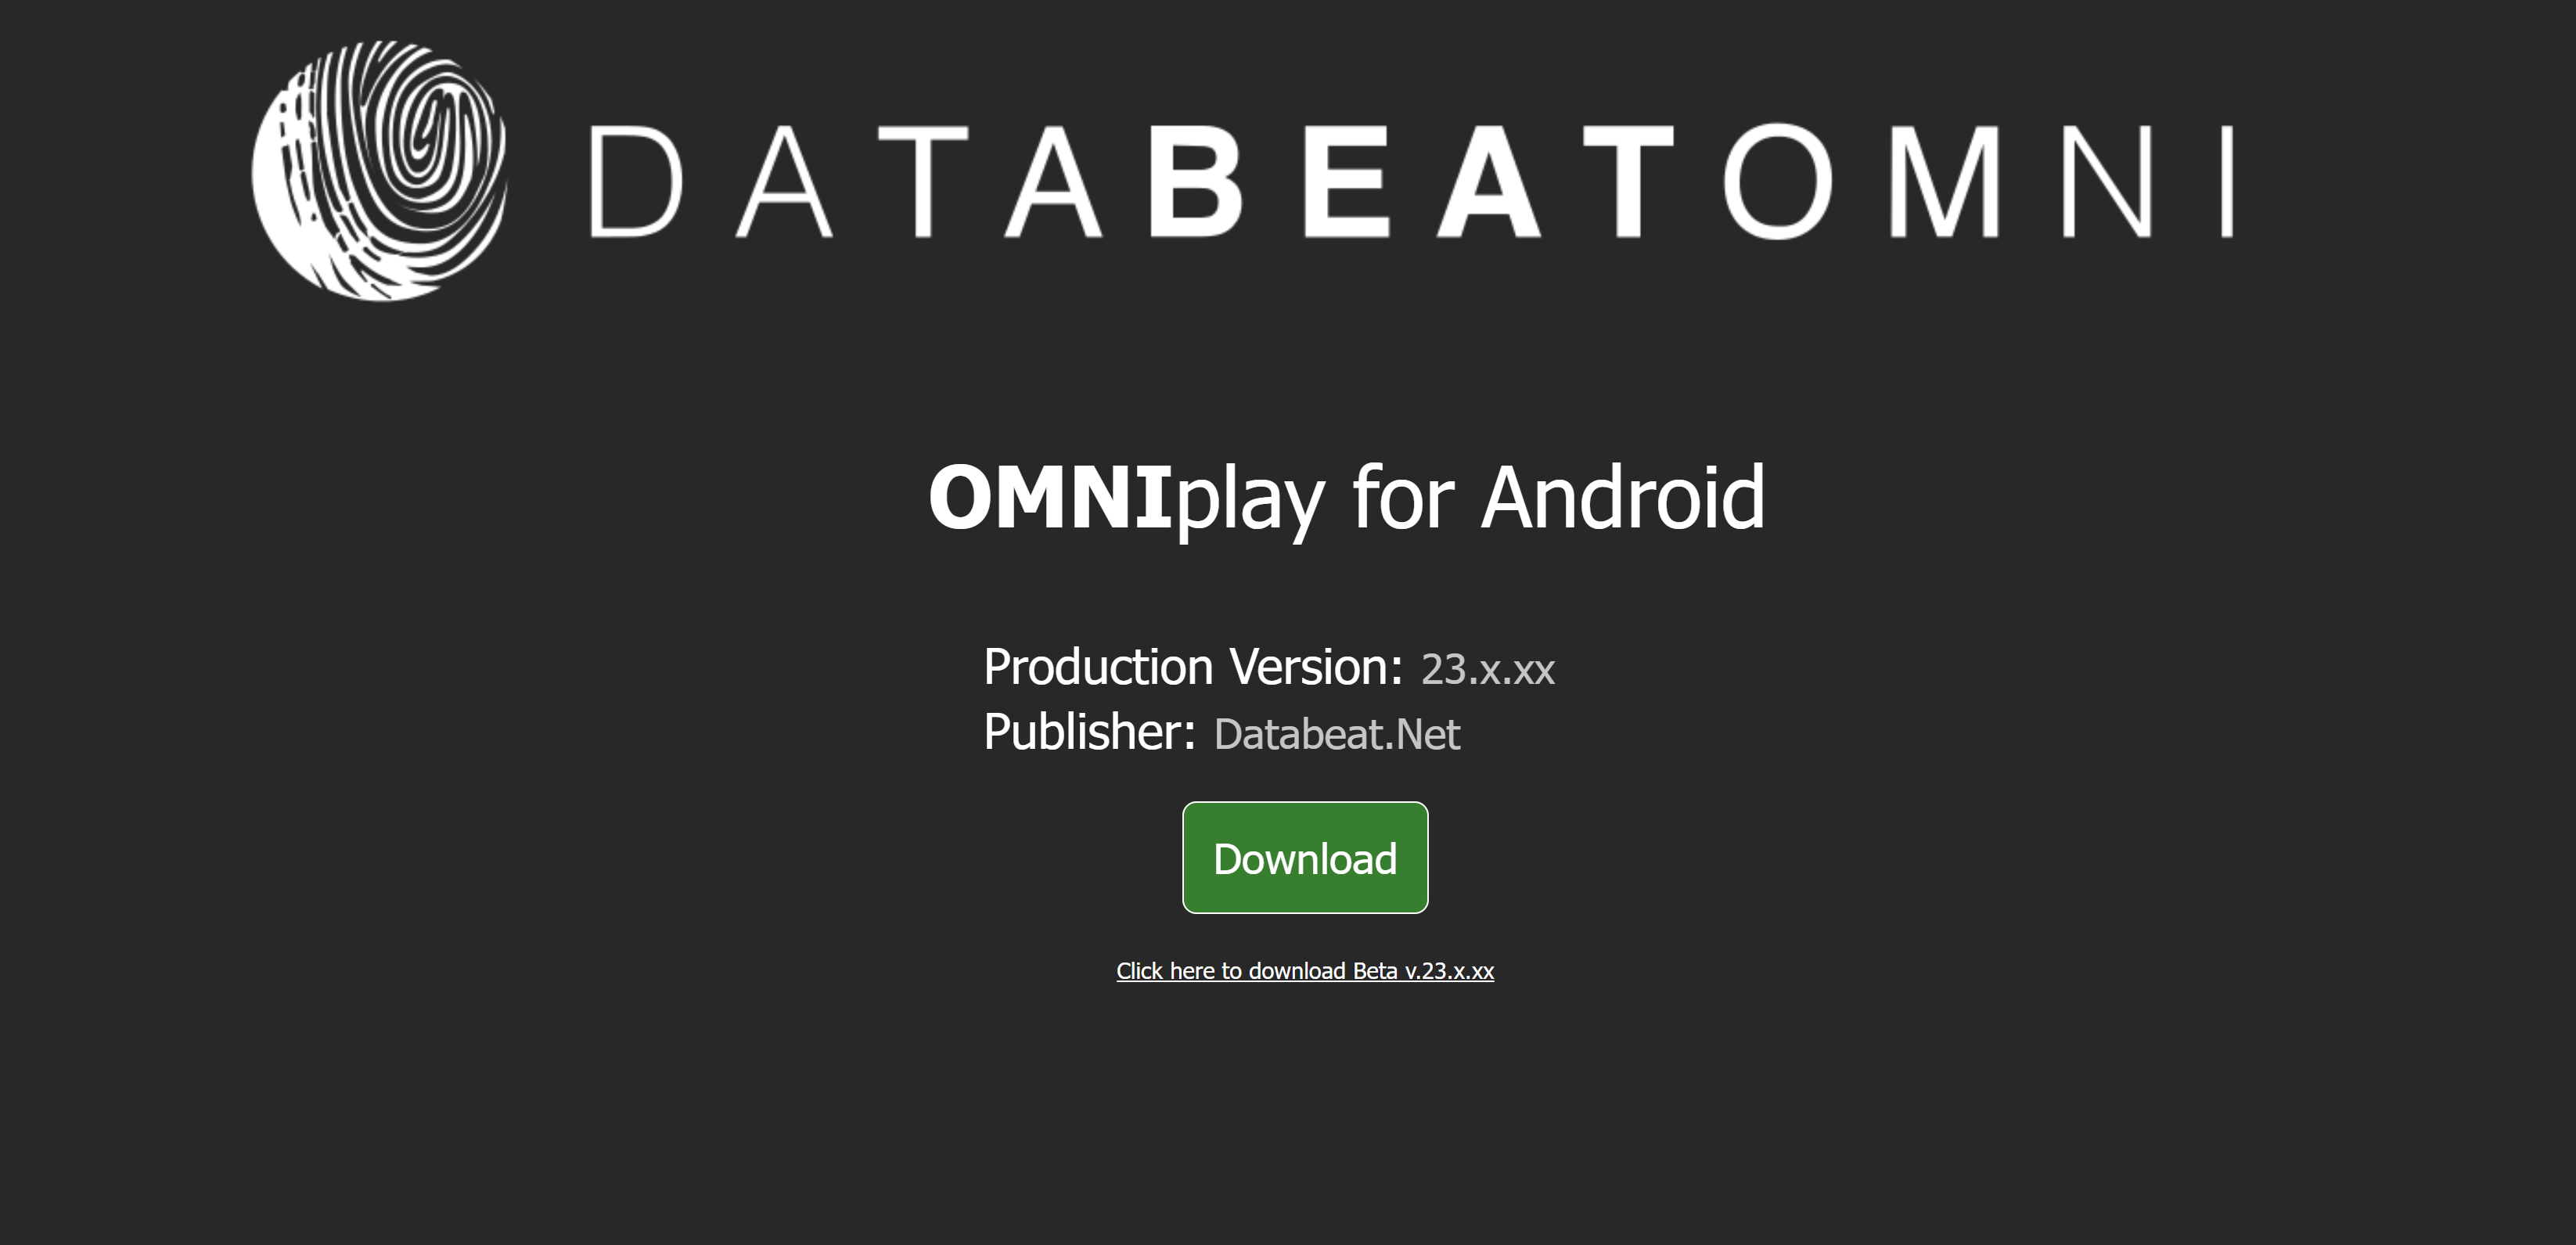 Download newest Databeat OMNIplay Android app for all Android devices like Philips, Vestel, Sharp, and more